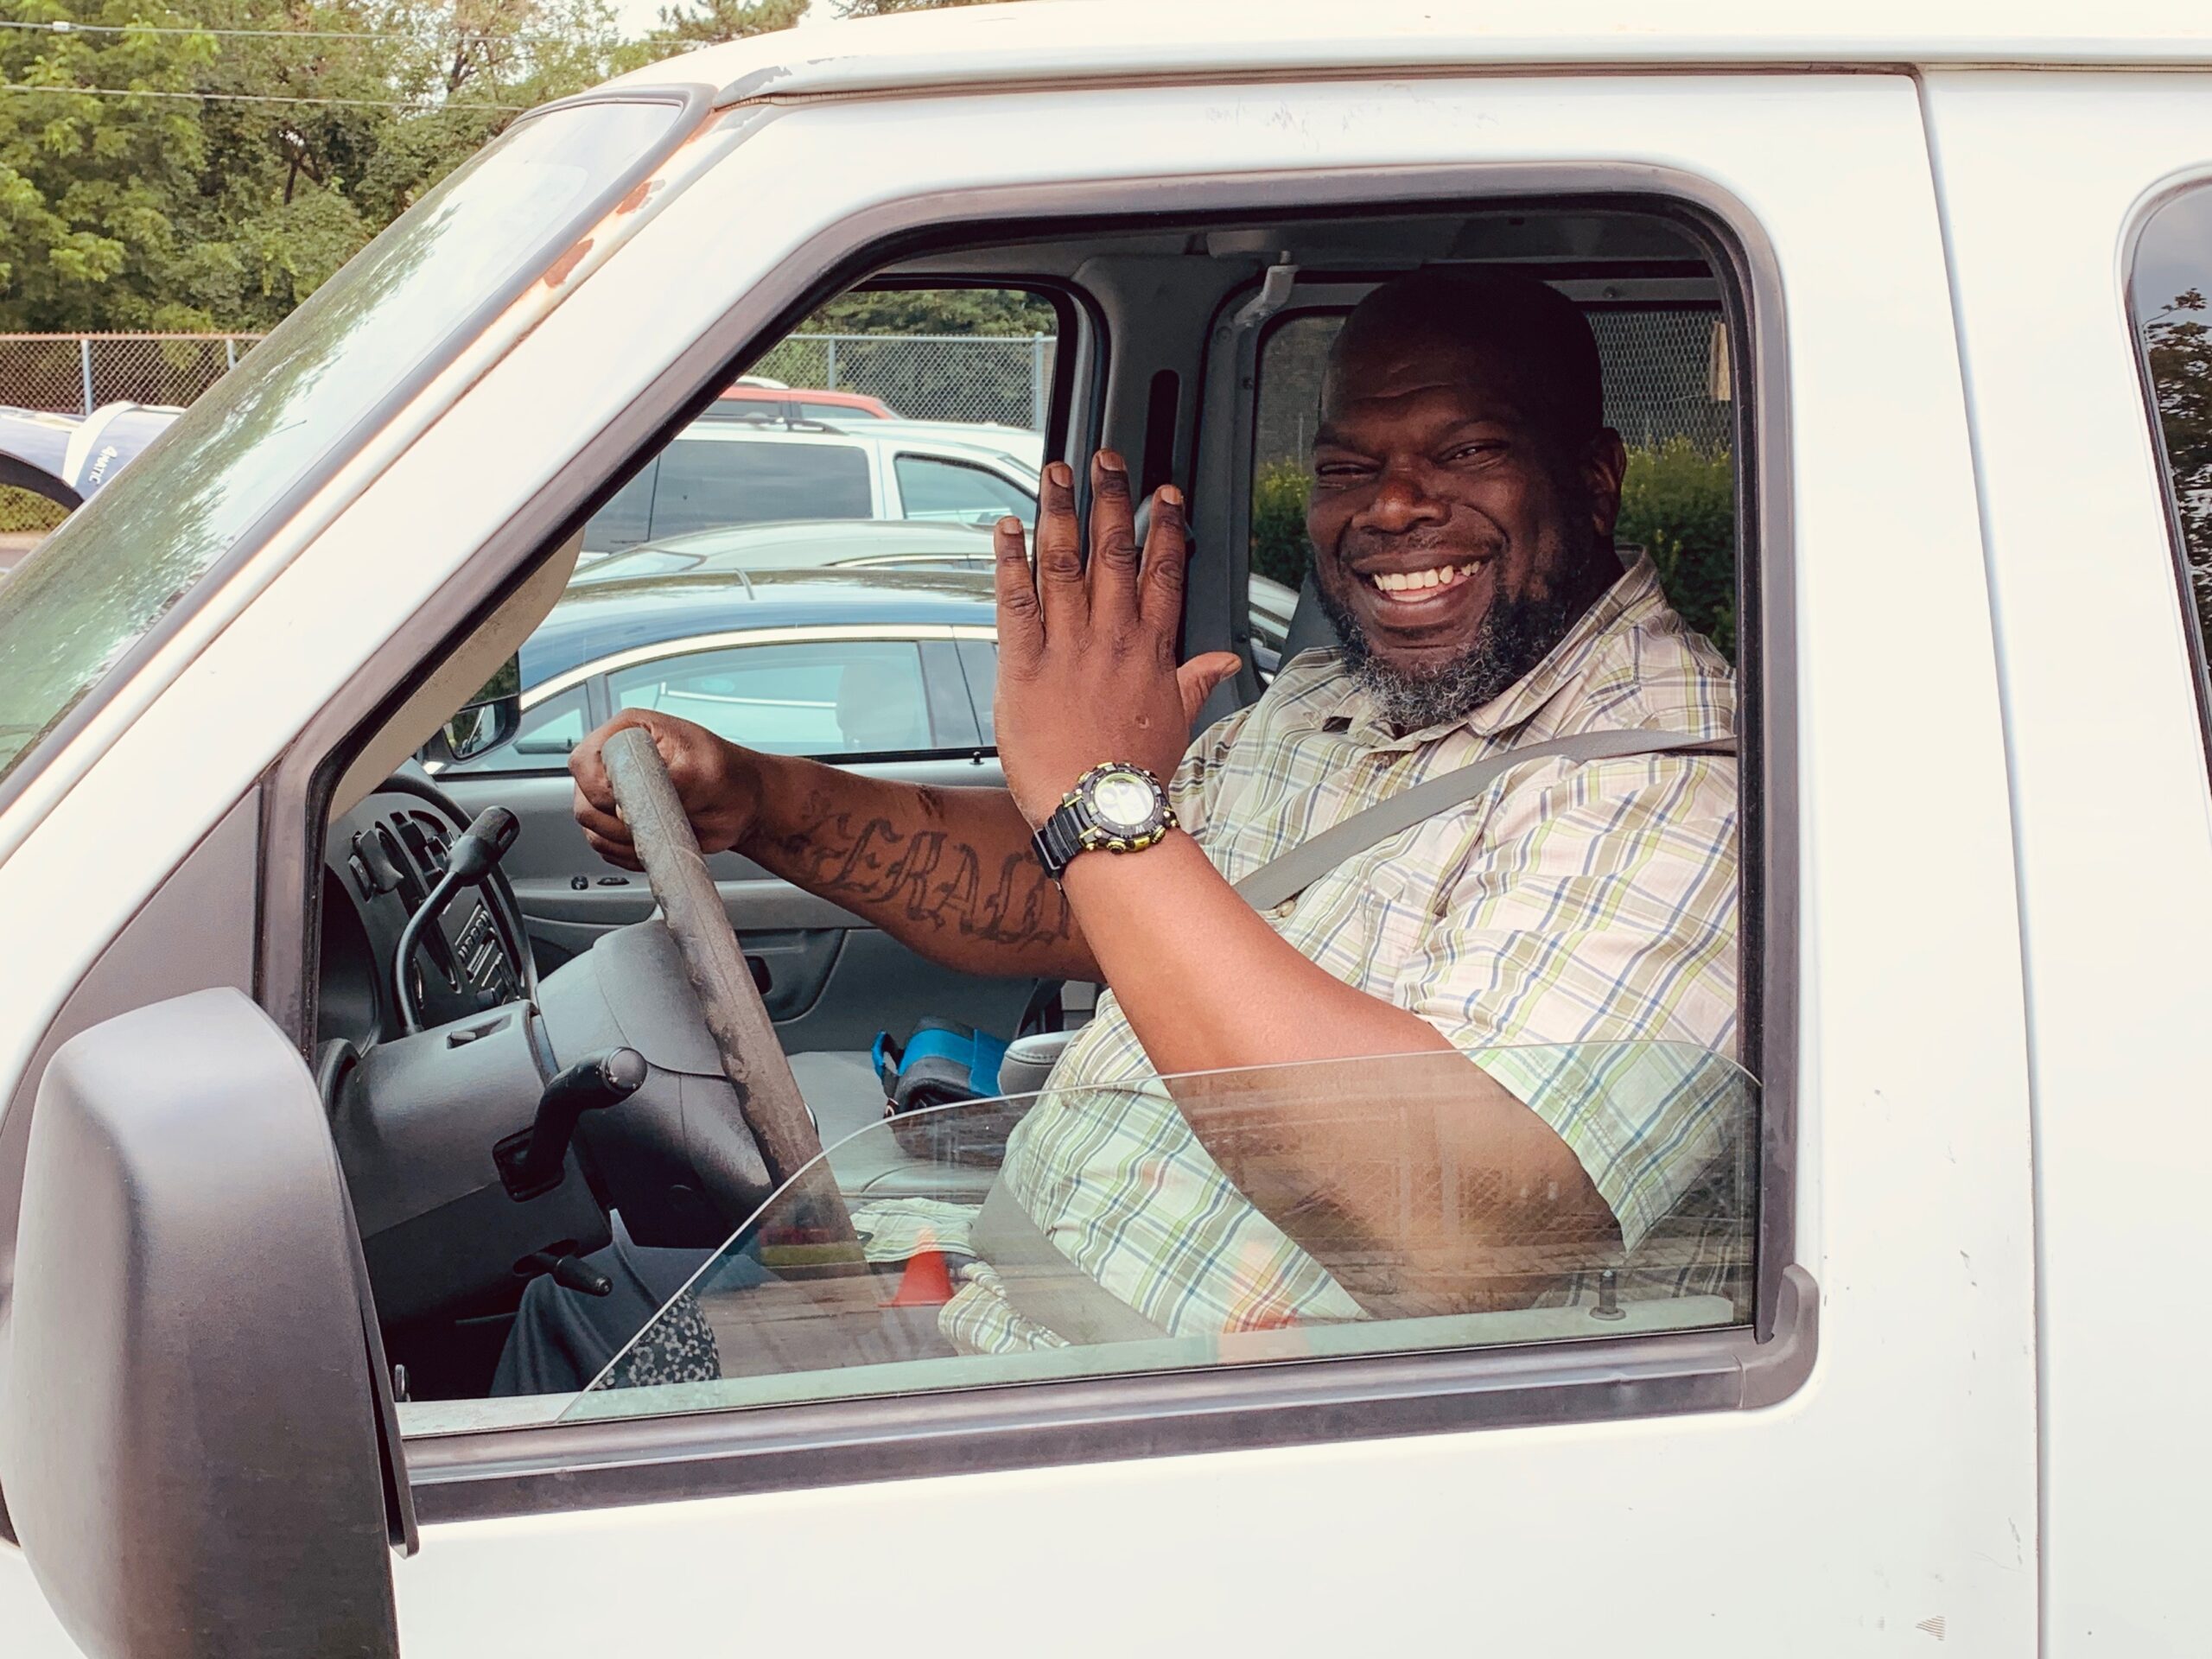 Hope Hall employee, an African American man waving and smiling from the driver's seat of a van.